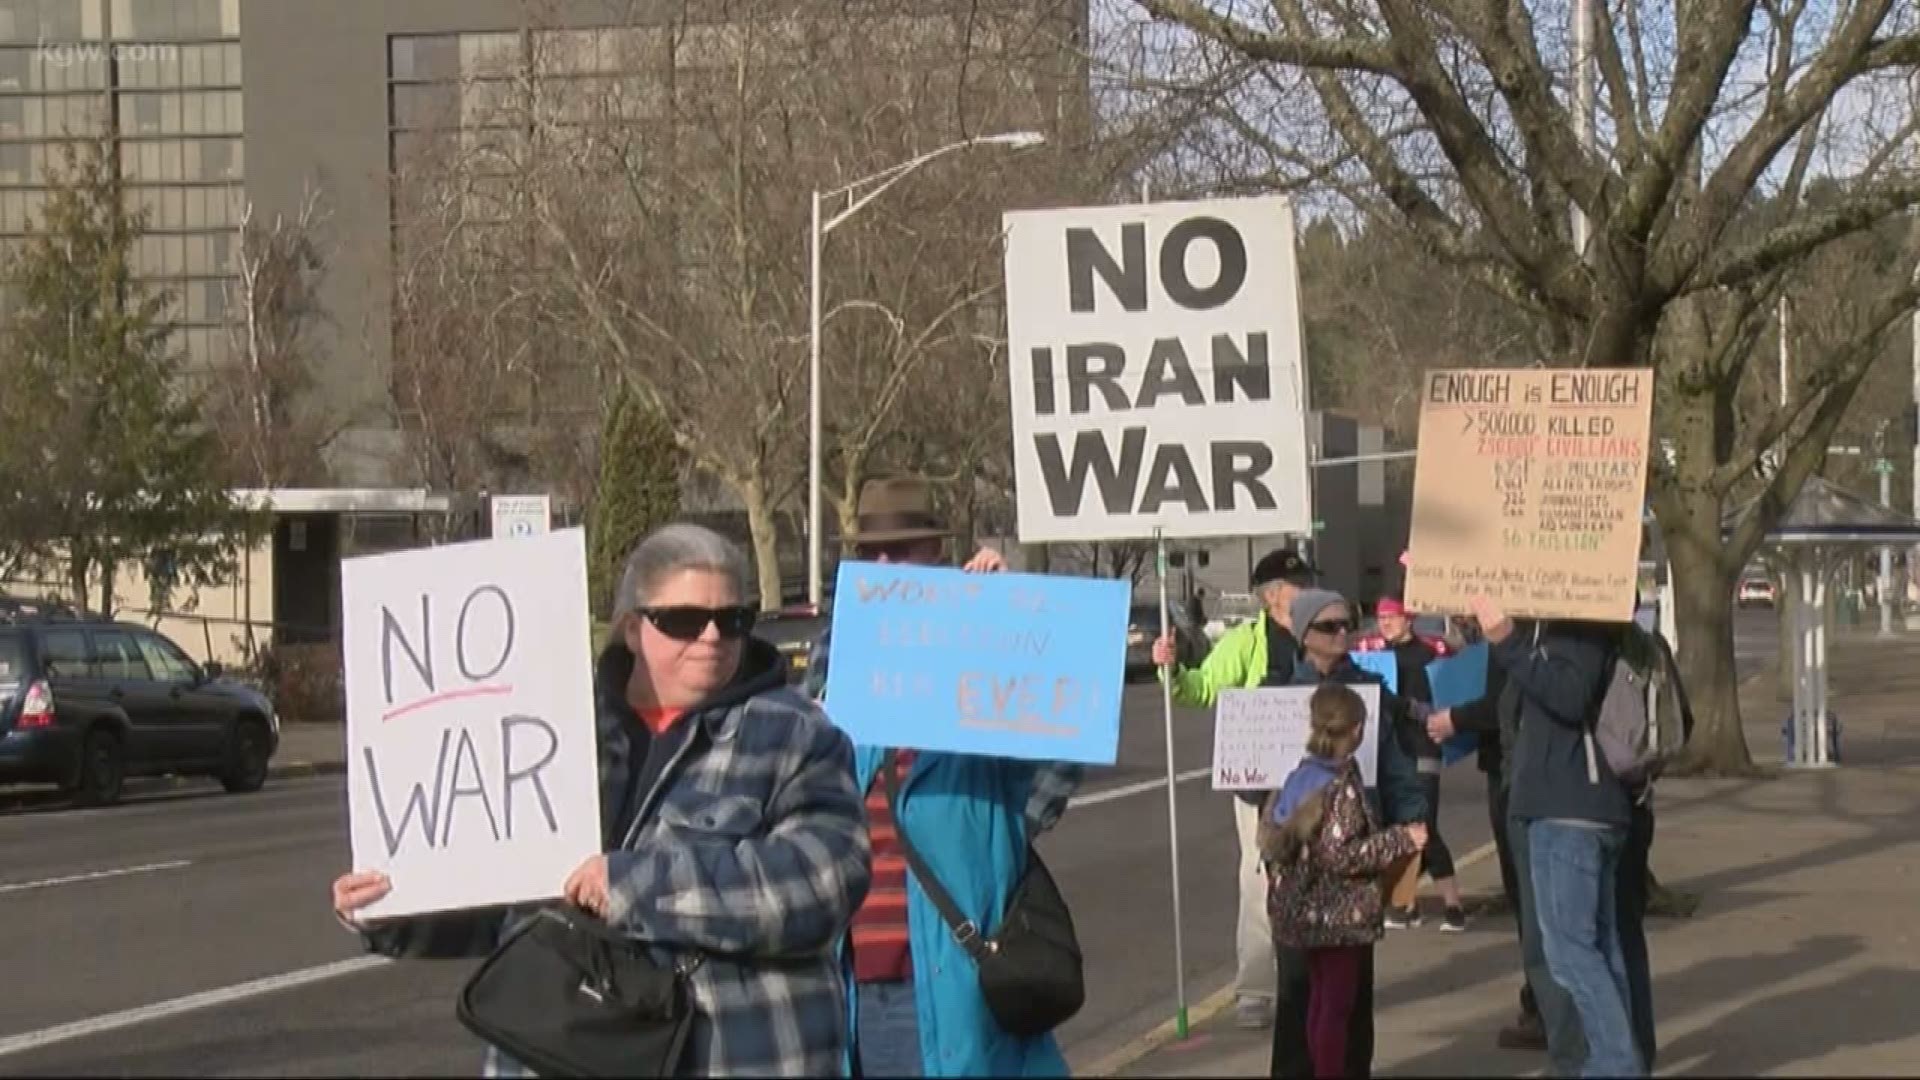 Iranian Americans are in fear of backlash as tensions rise. We hear from them.